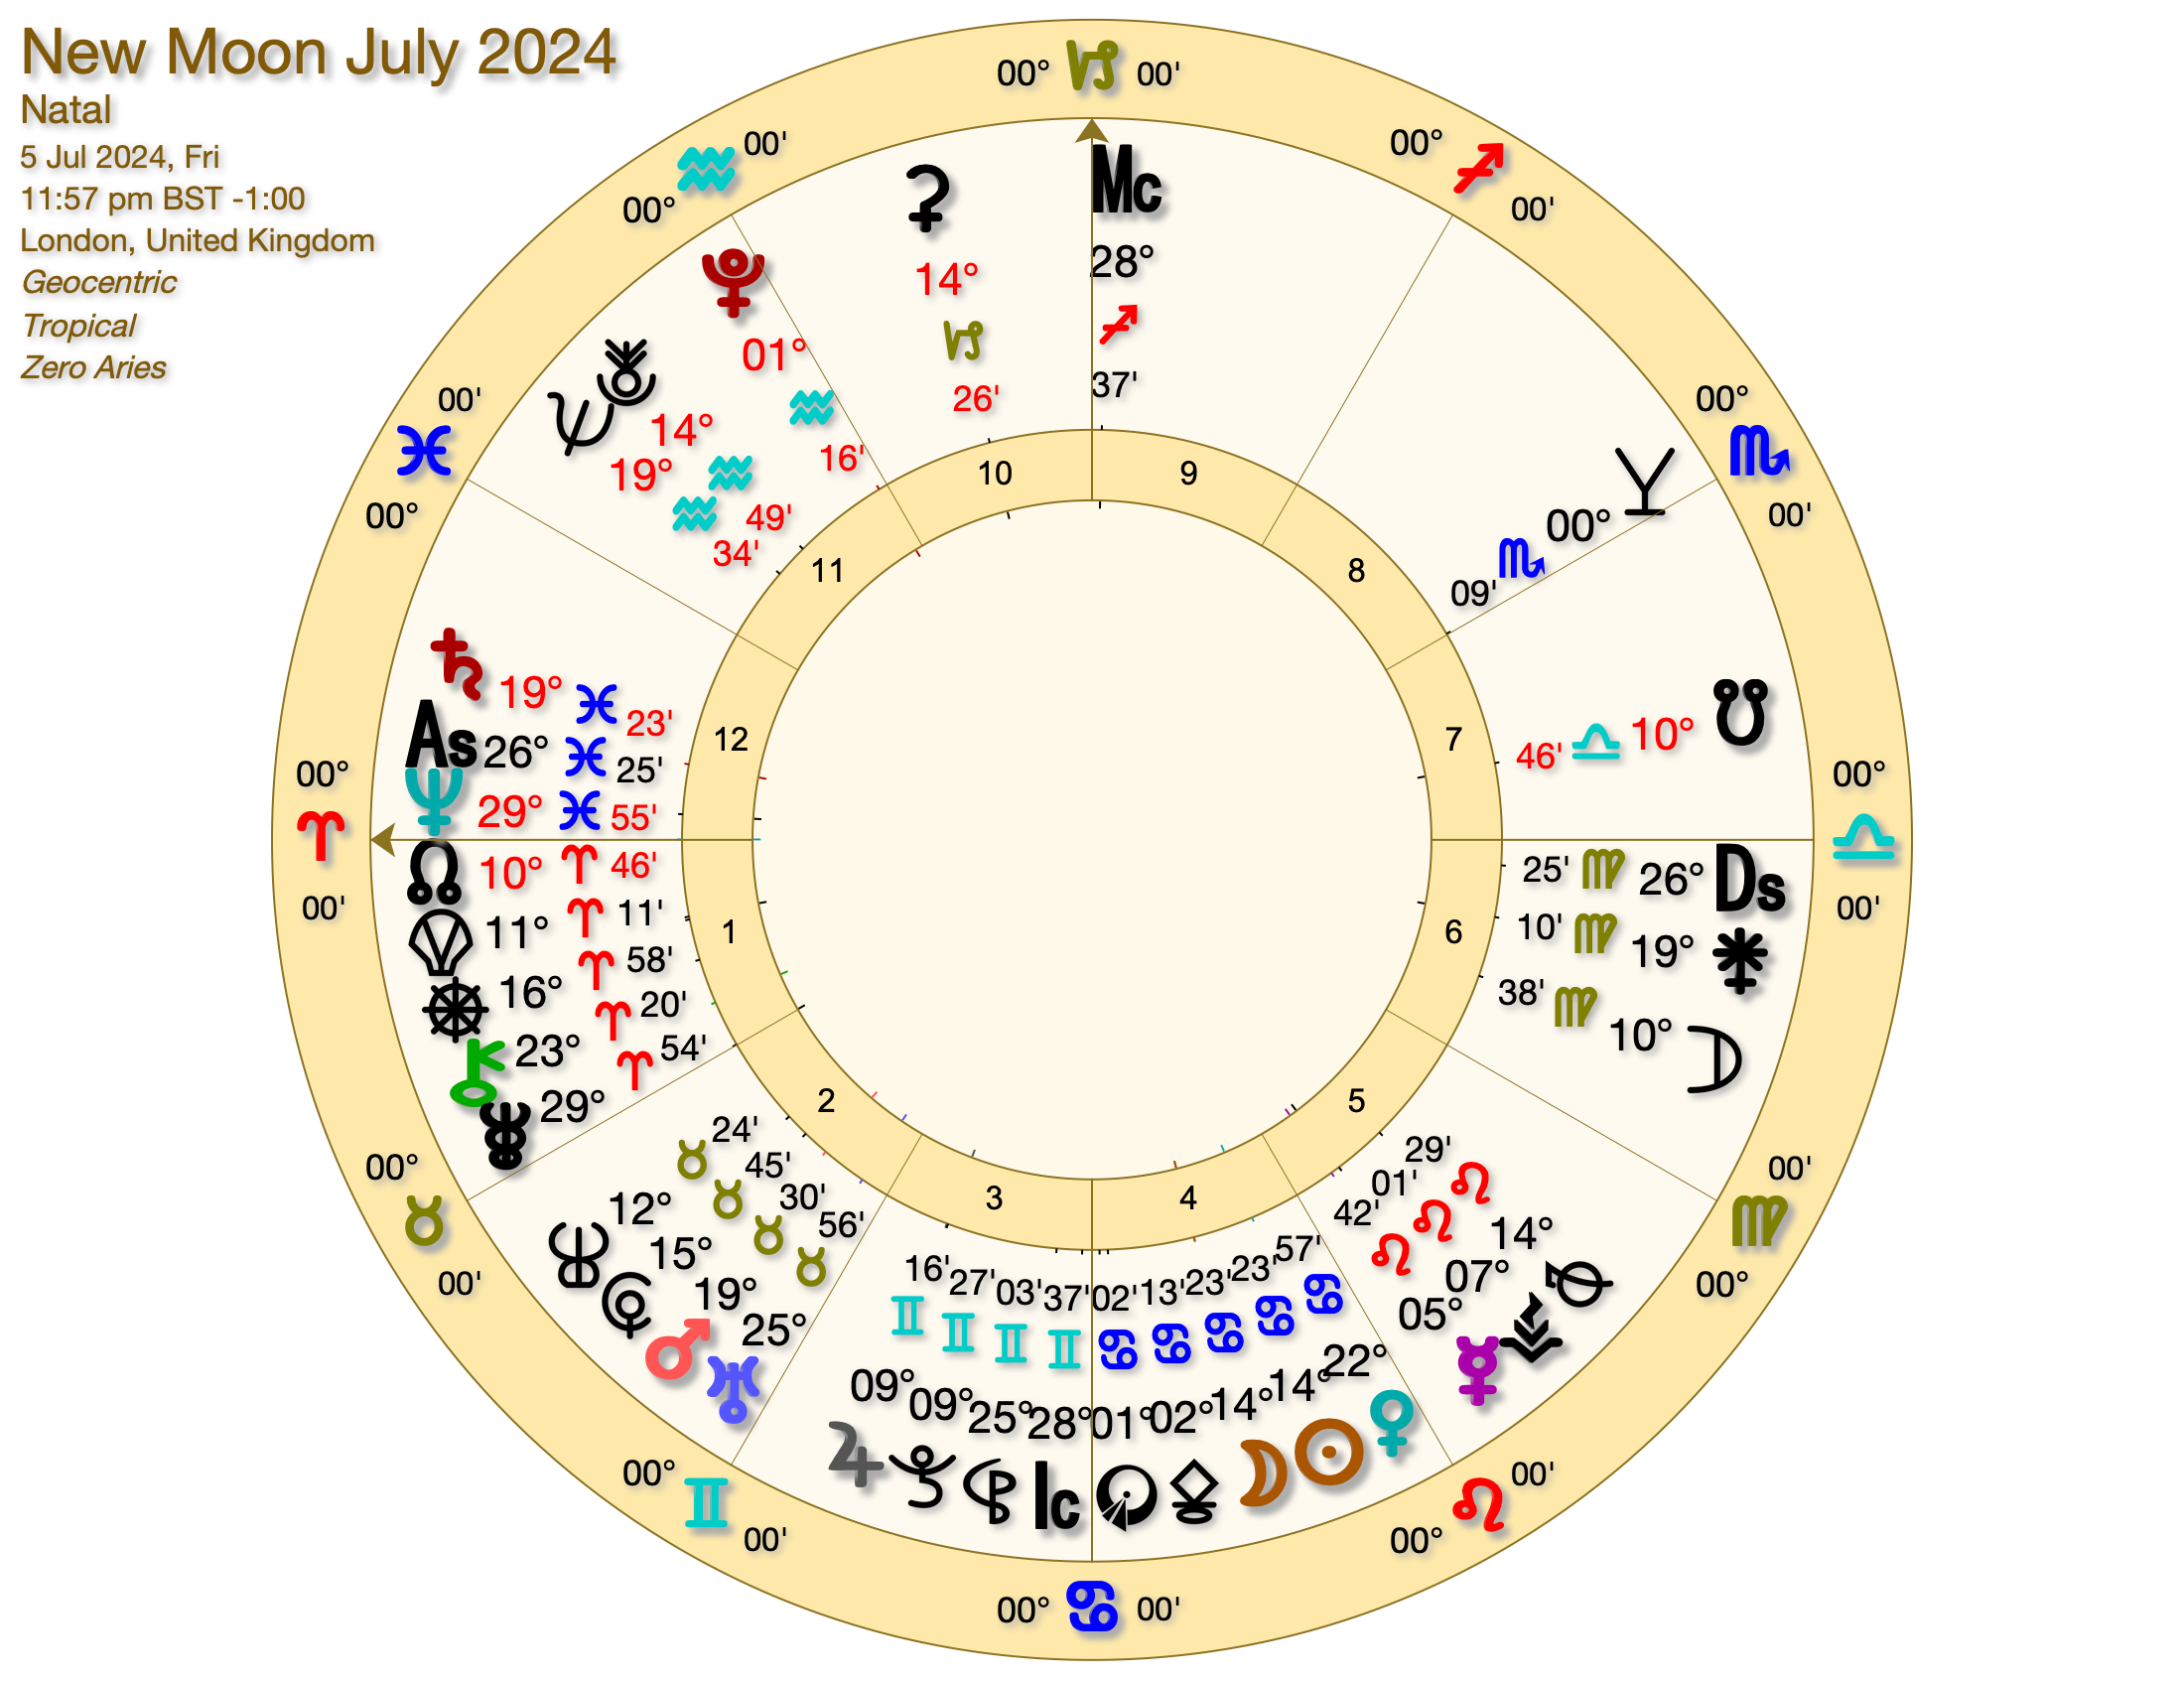 New Moon July 2024 - New Monthly Astrology Videos